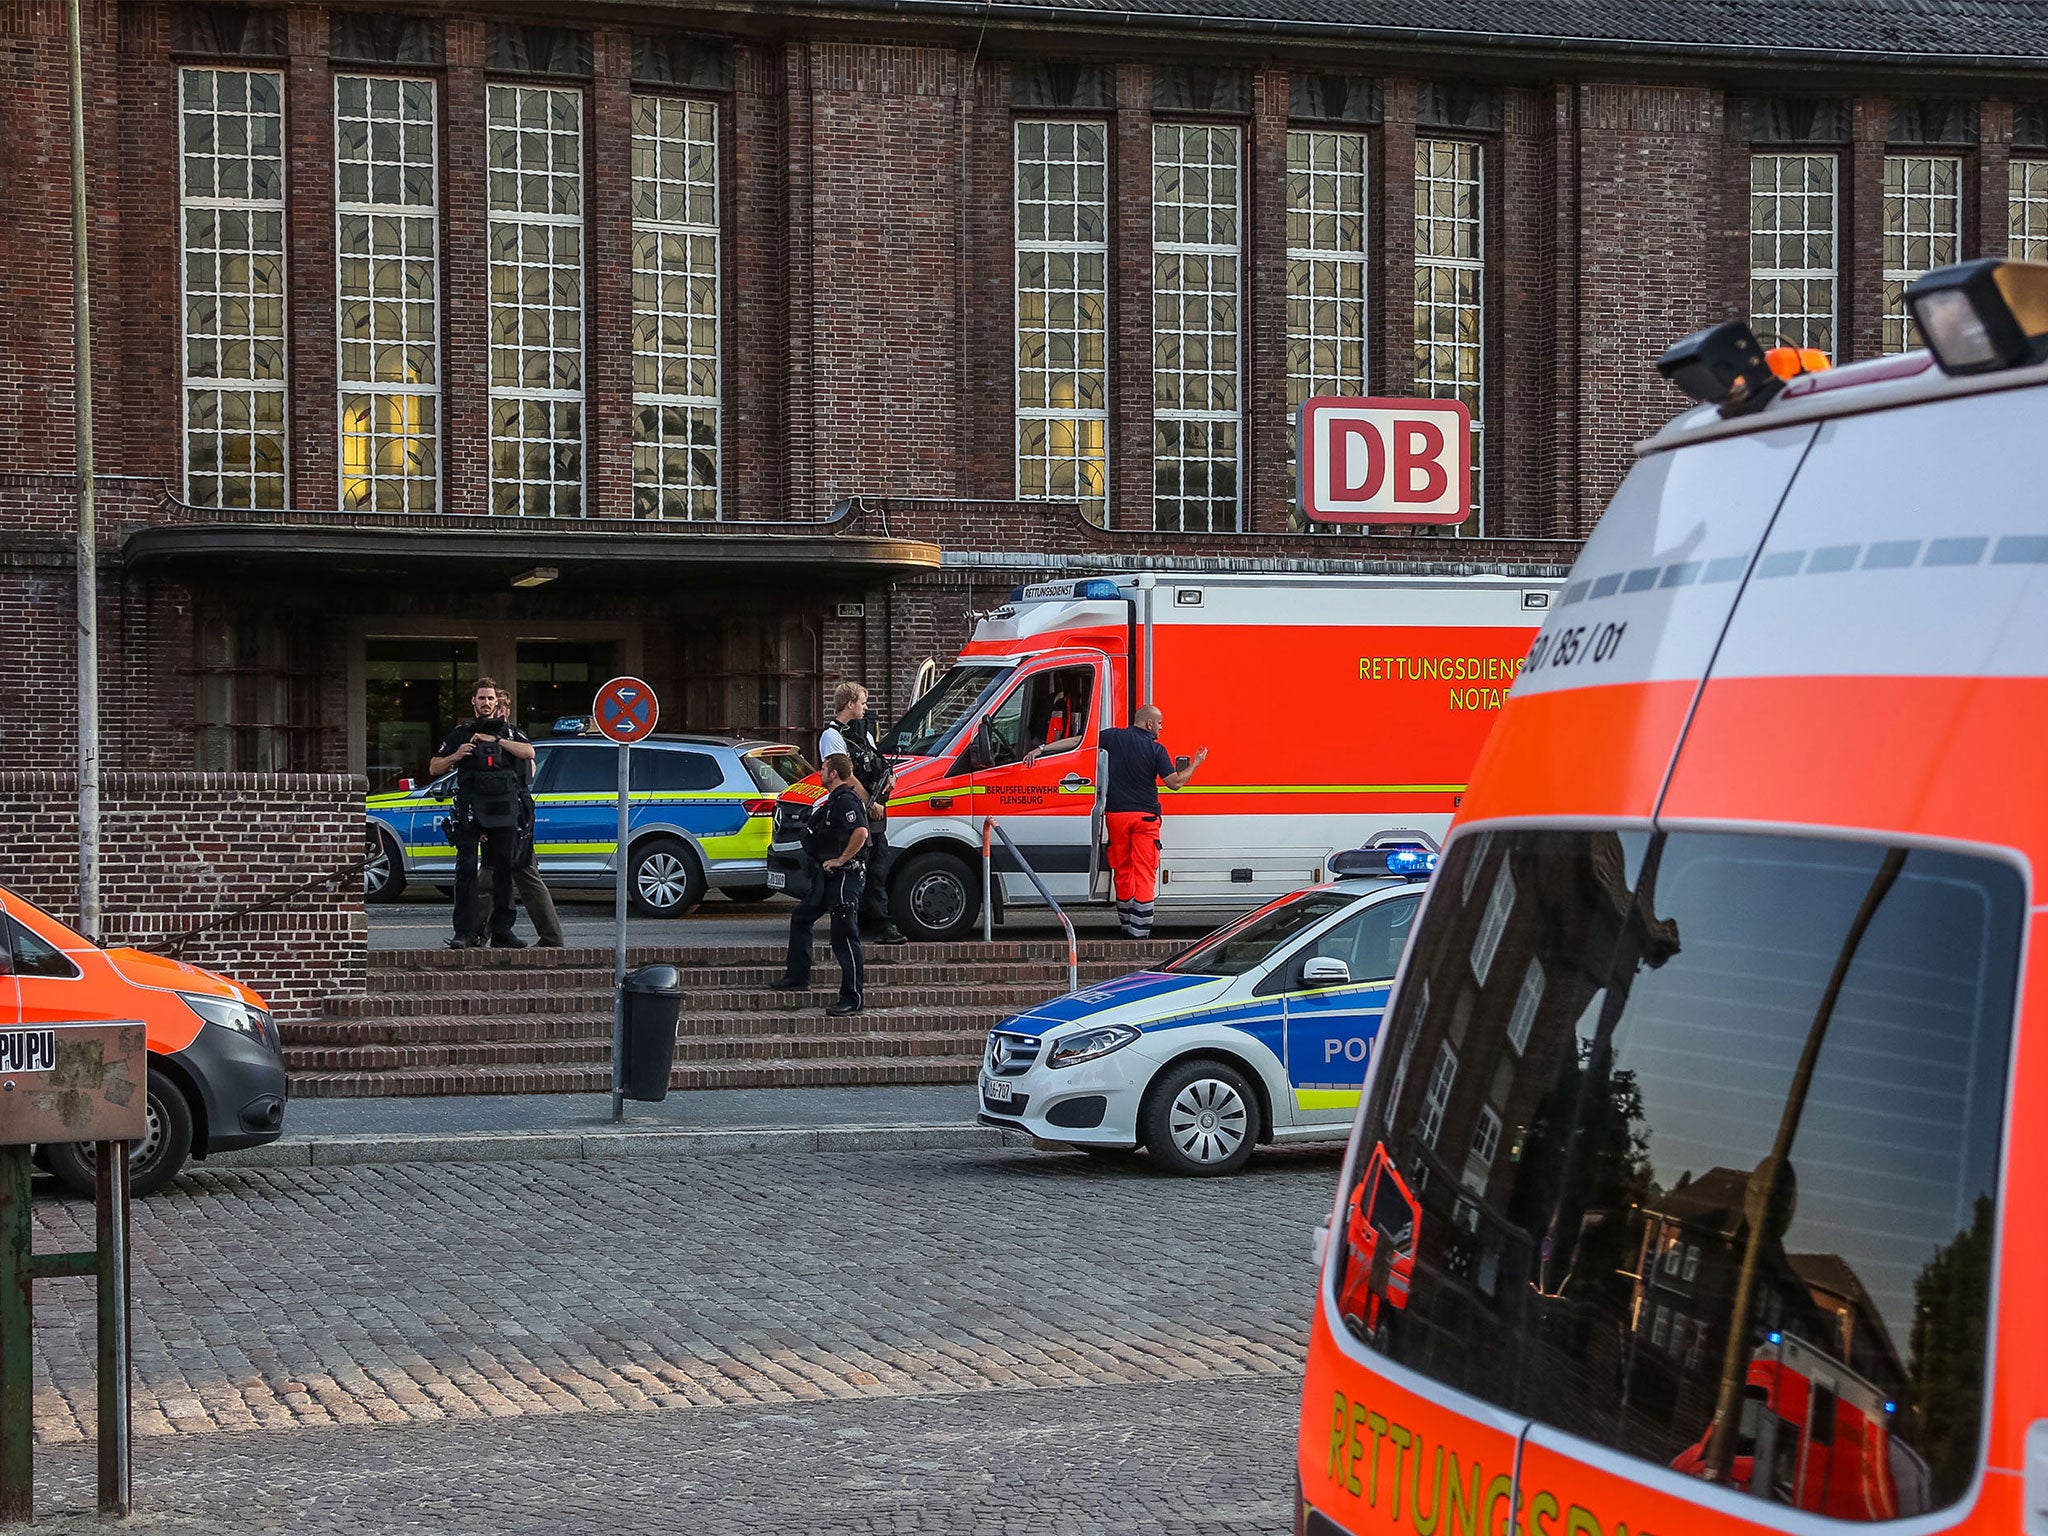 Flensburg's main train station has reportedly been evacuated following the incident